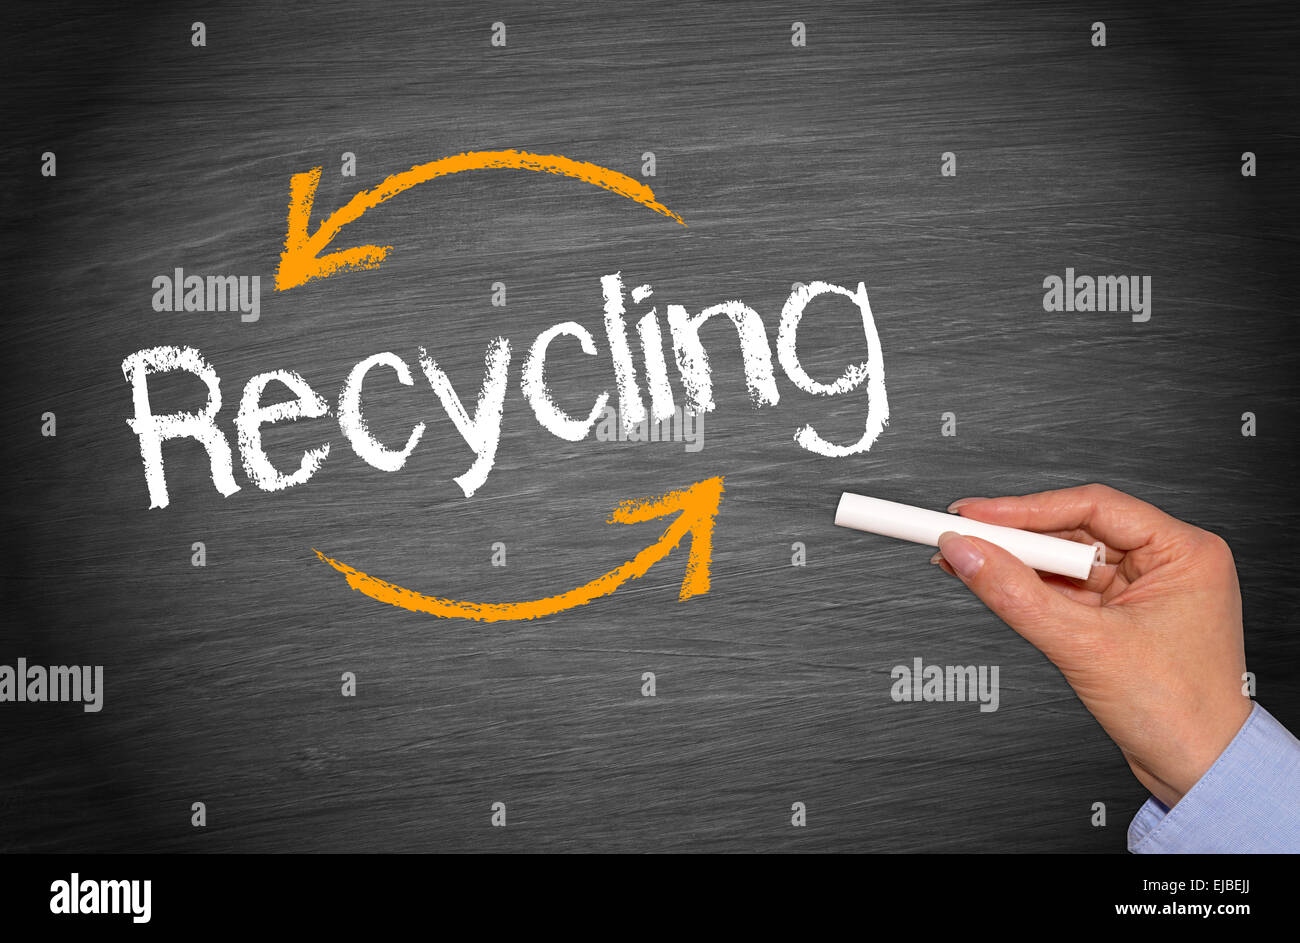 Recycling Stock Photo